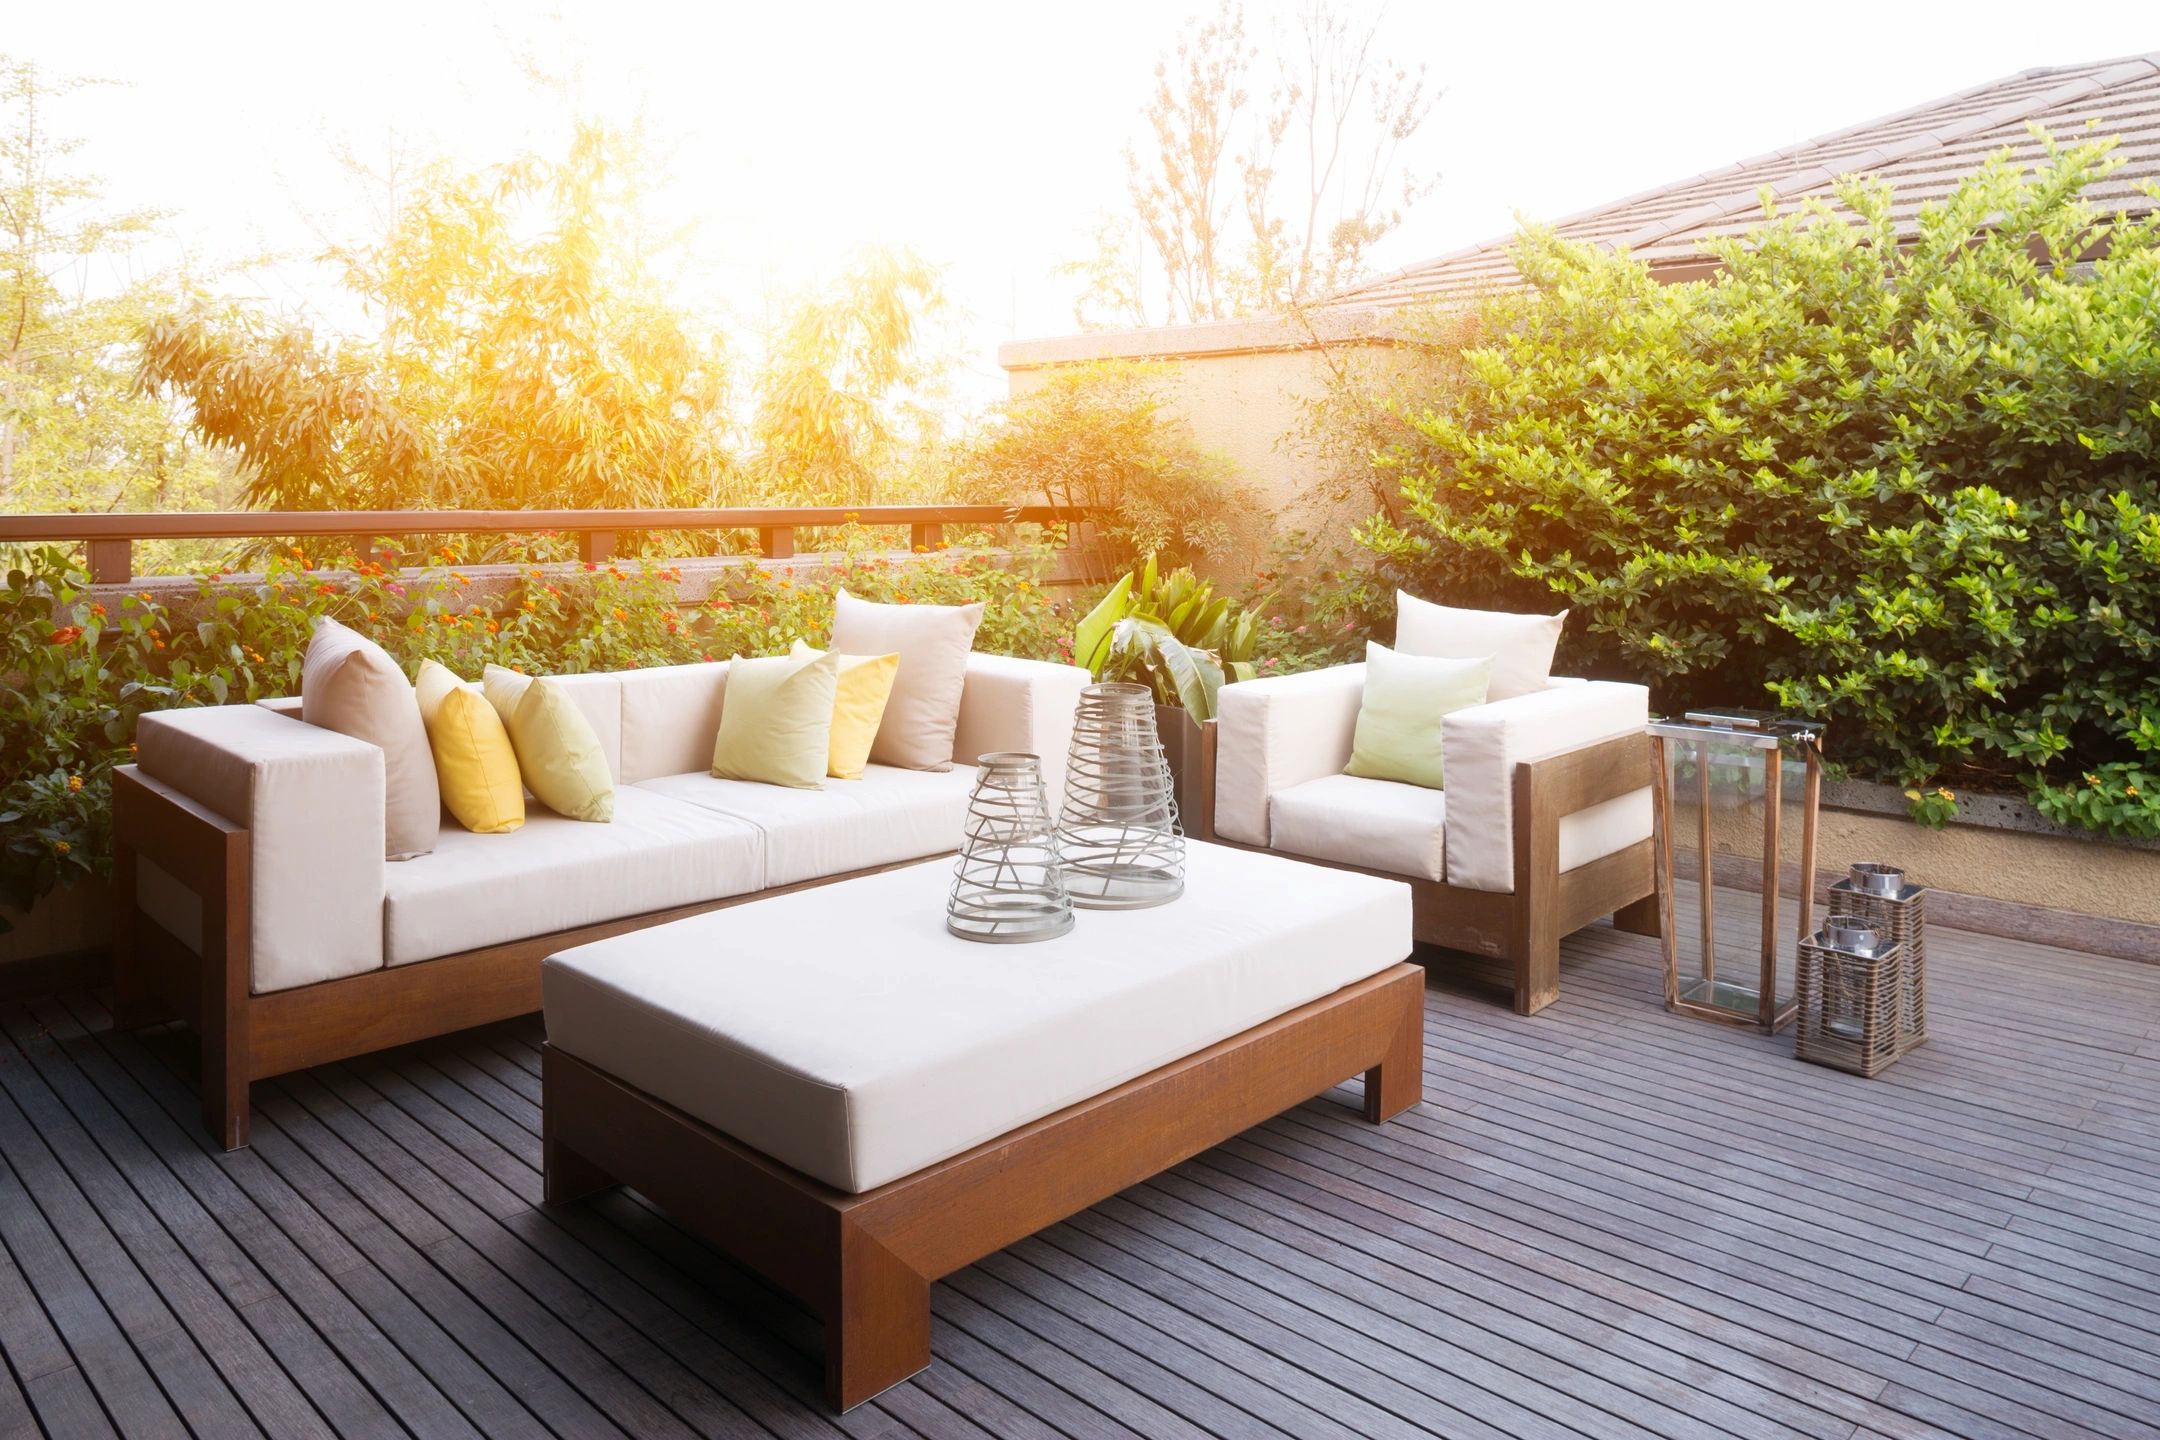 5 Simple Upgrades for a More Inviting Outdoor Living Area